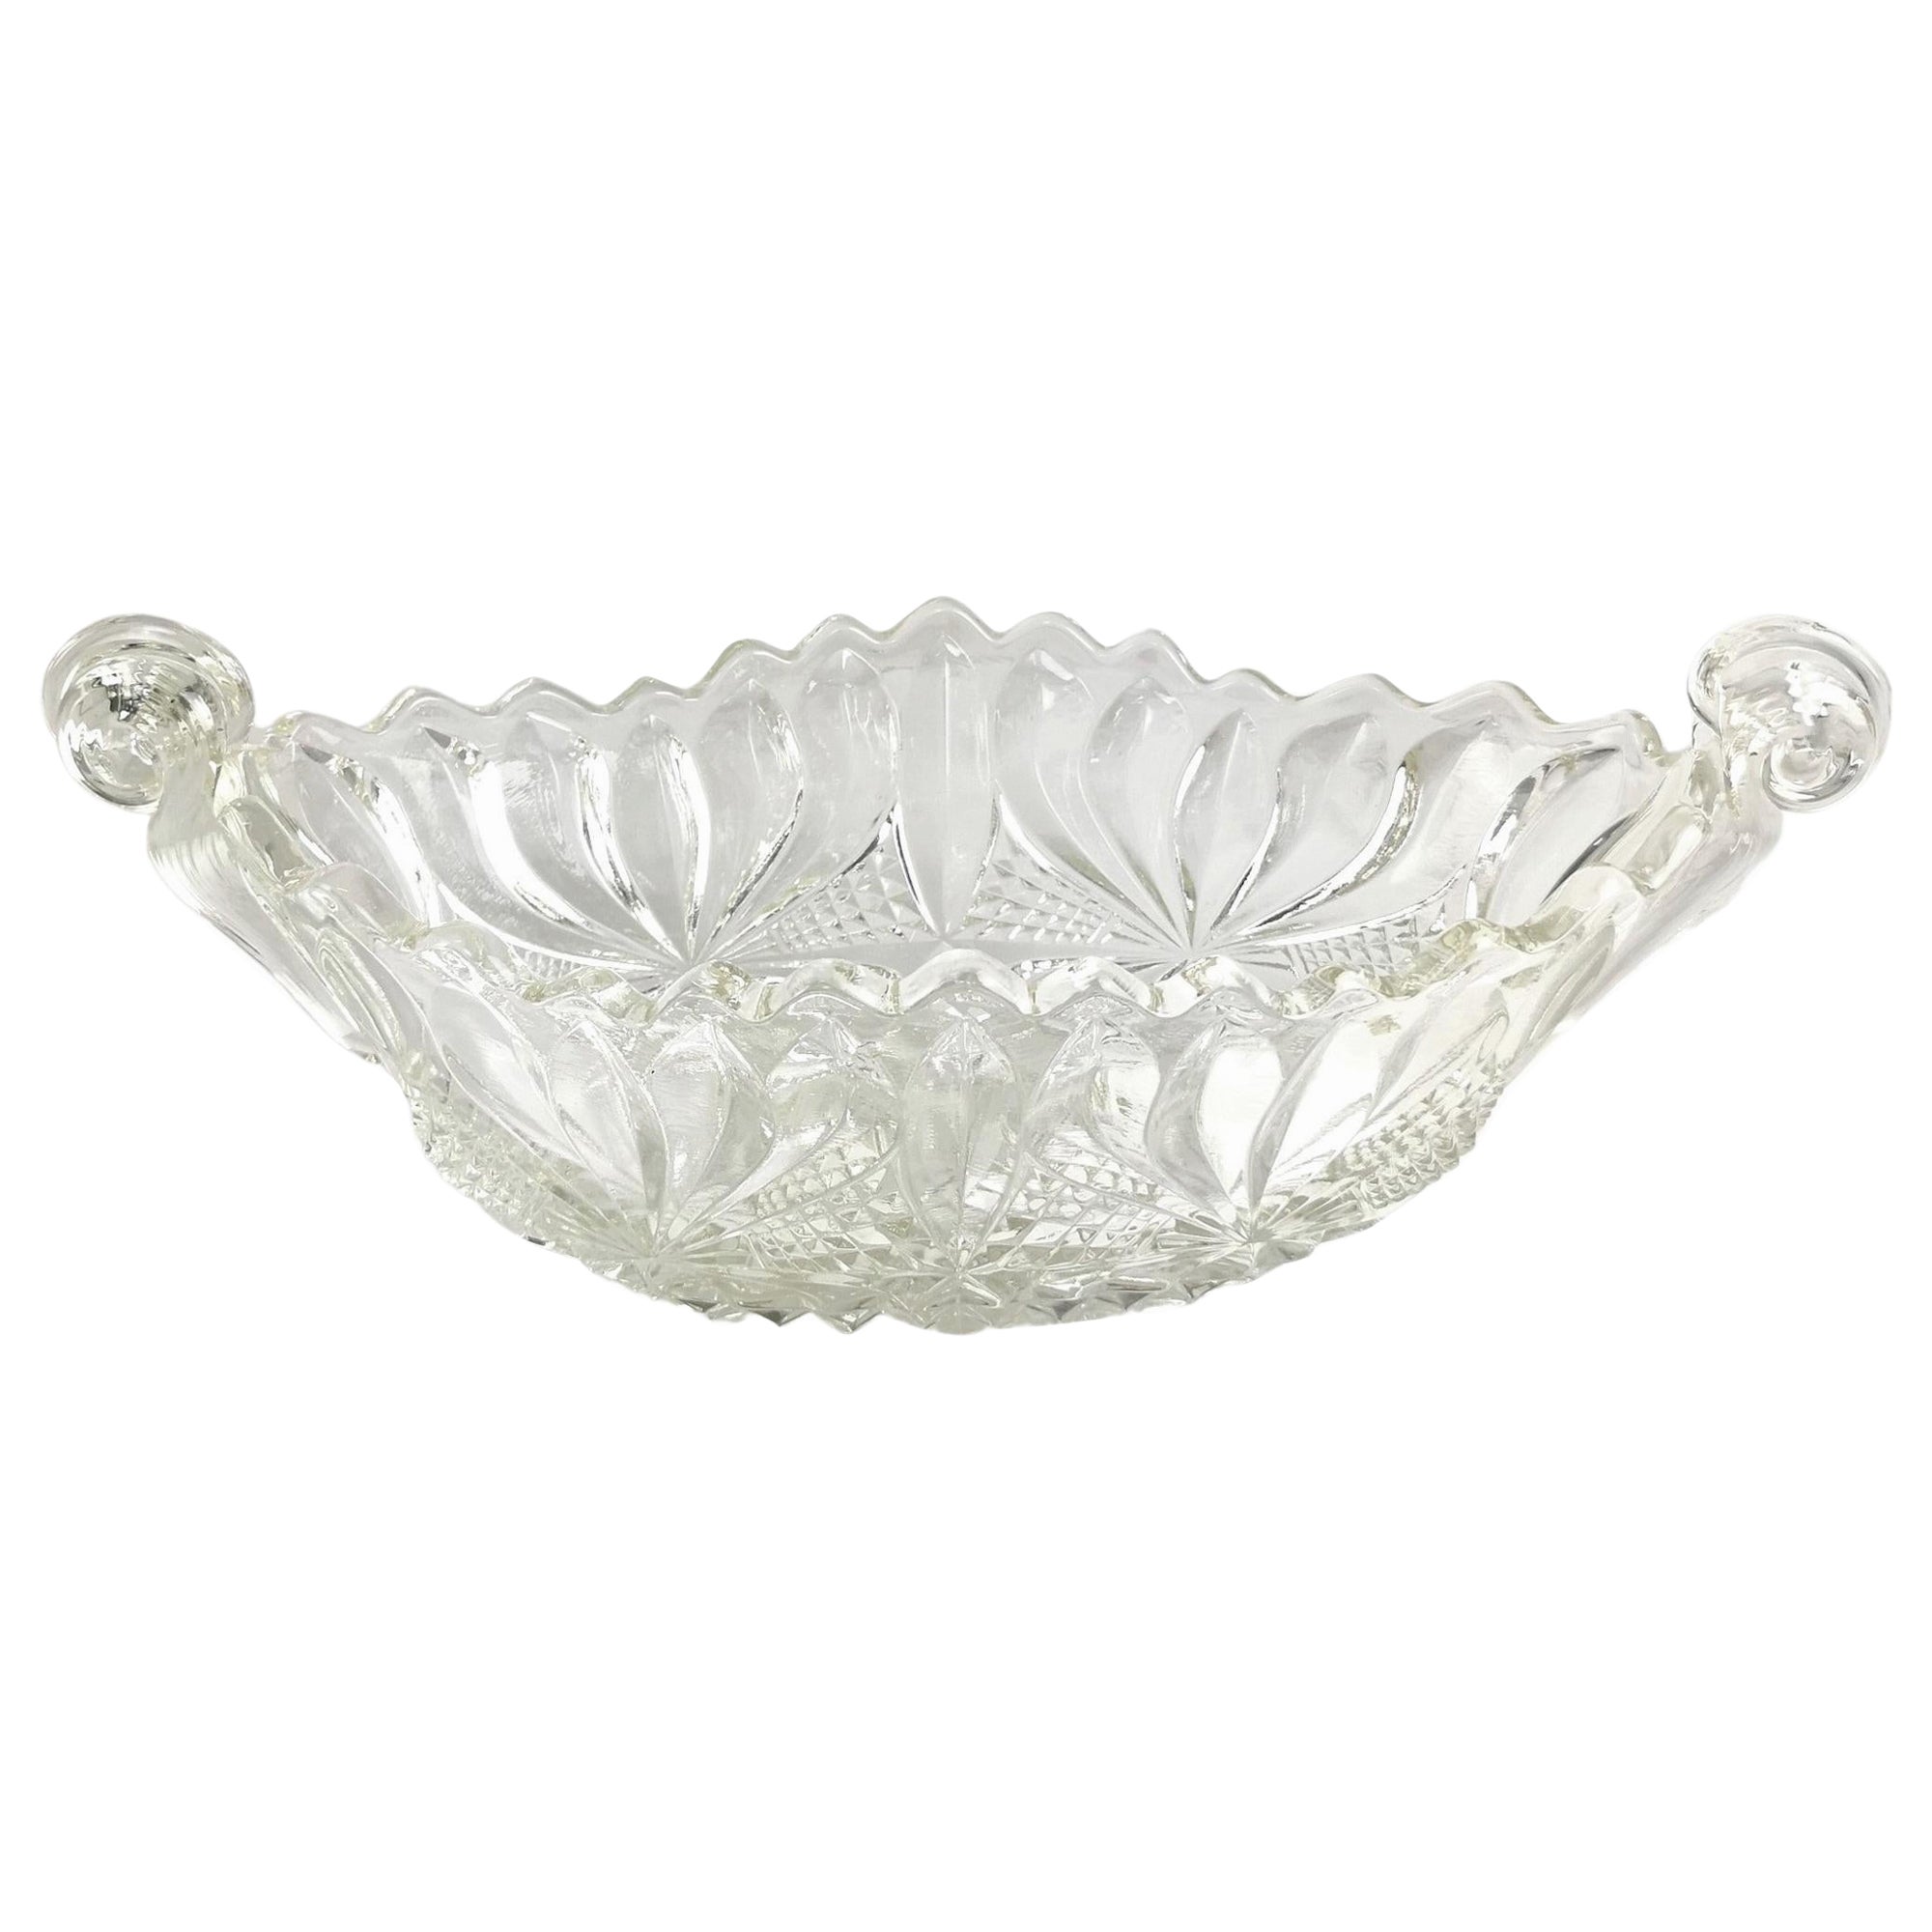 Serveware, Ceramics, Silver and Glass at Auction